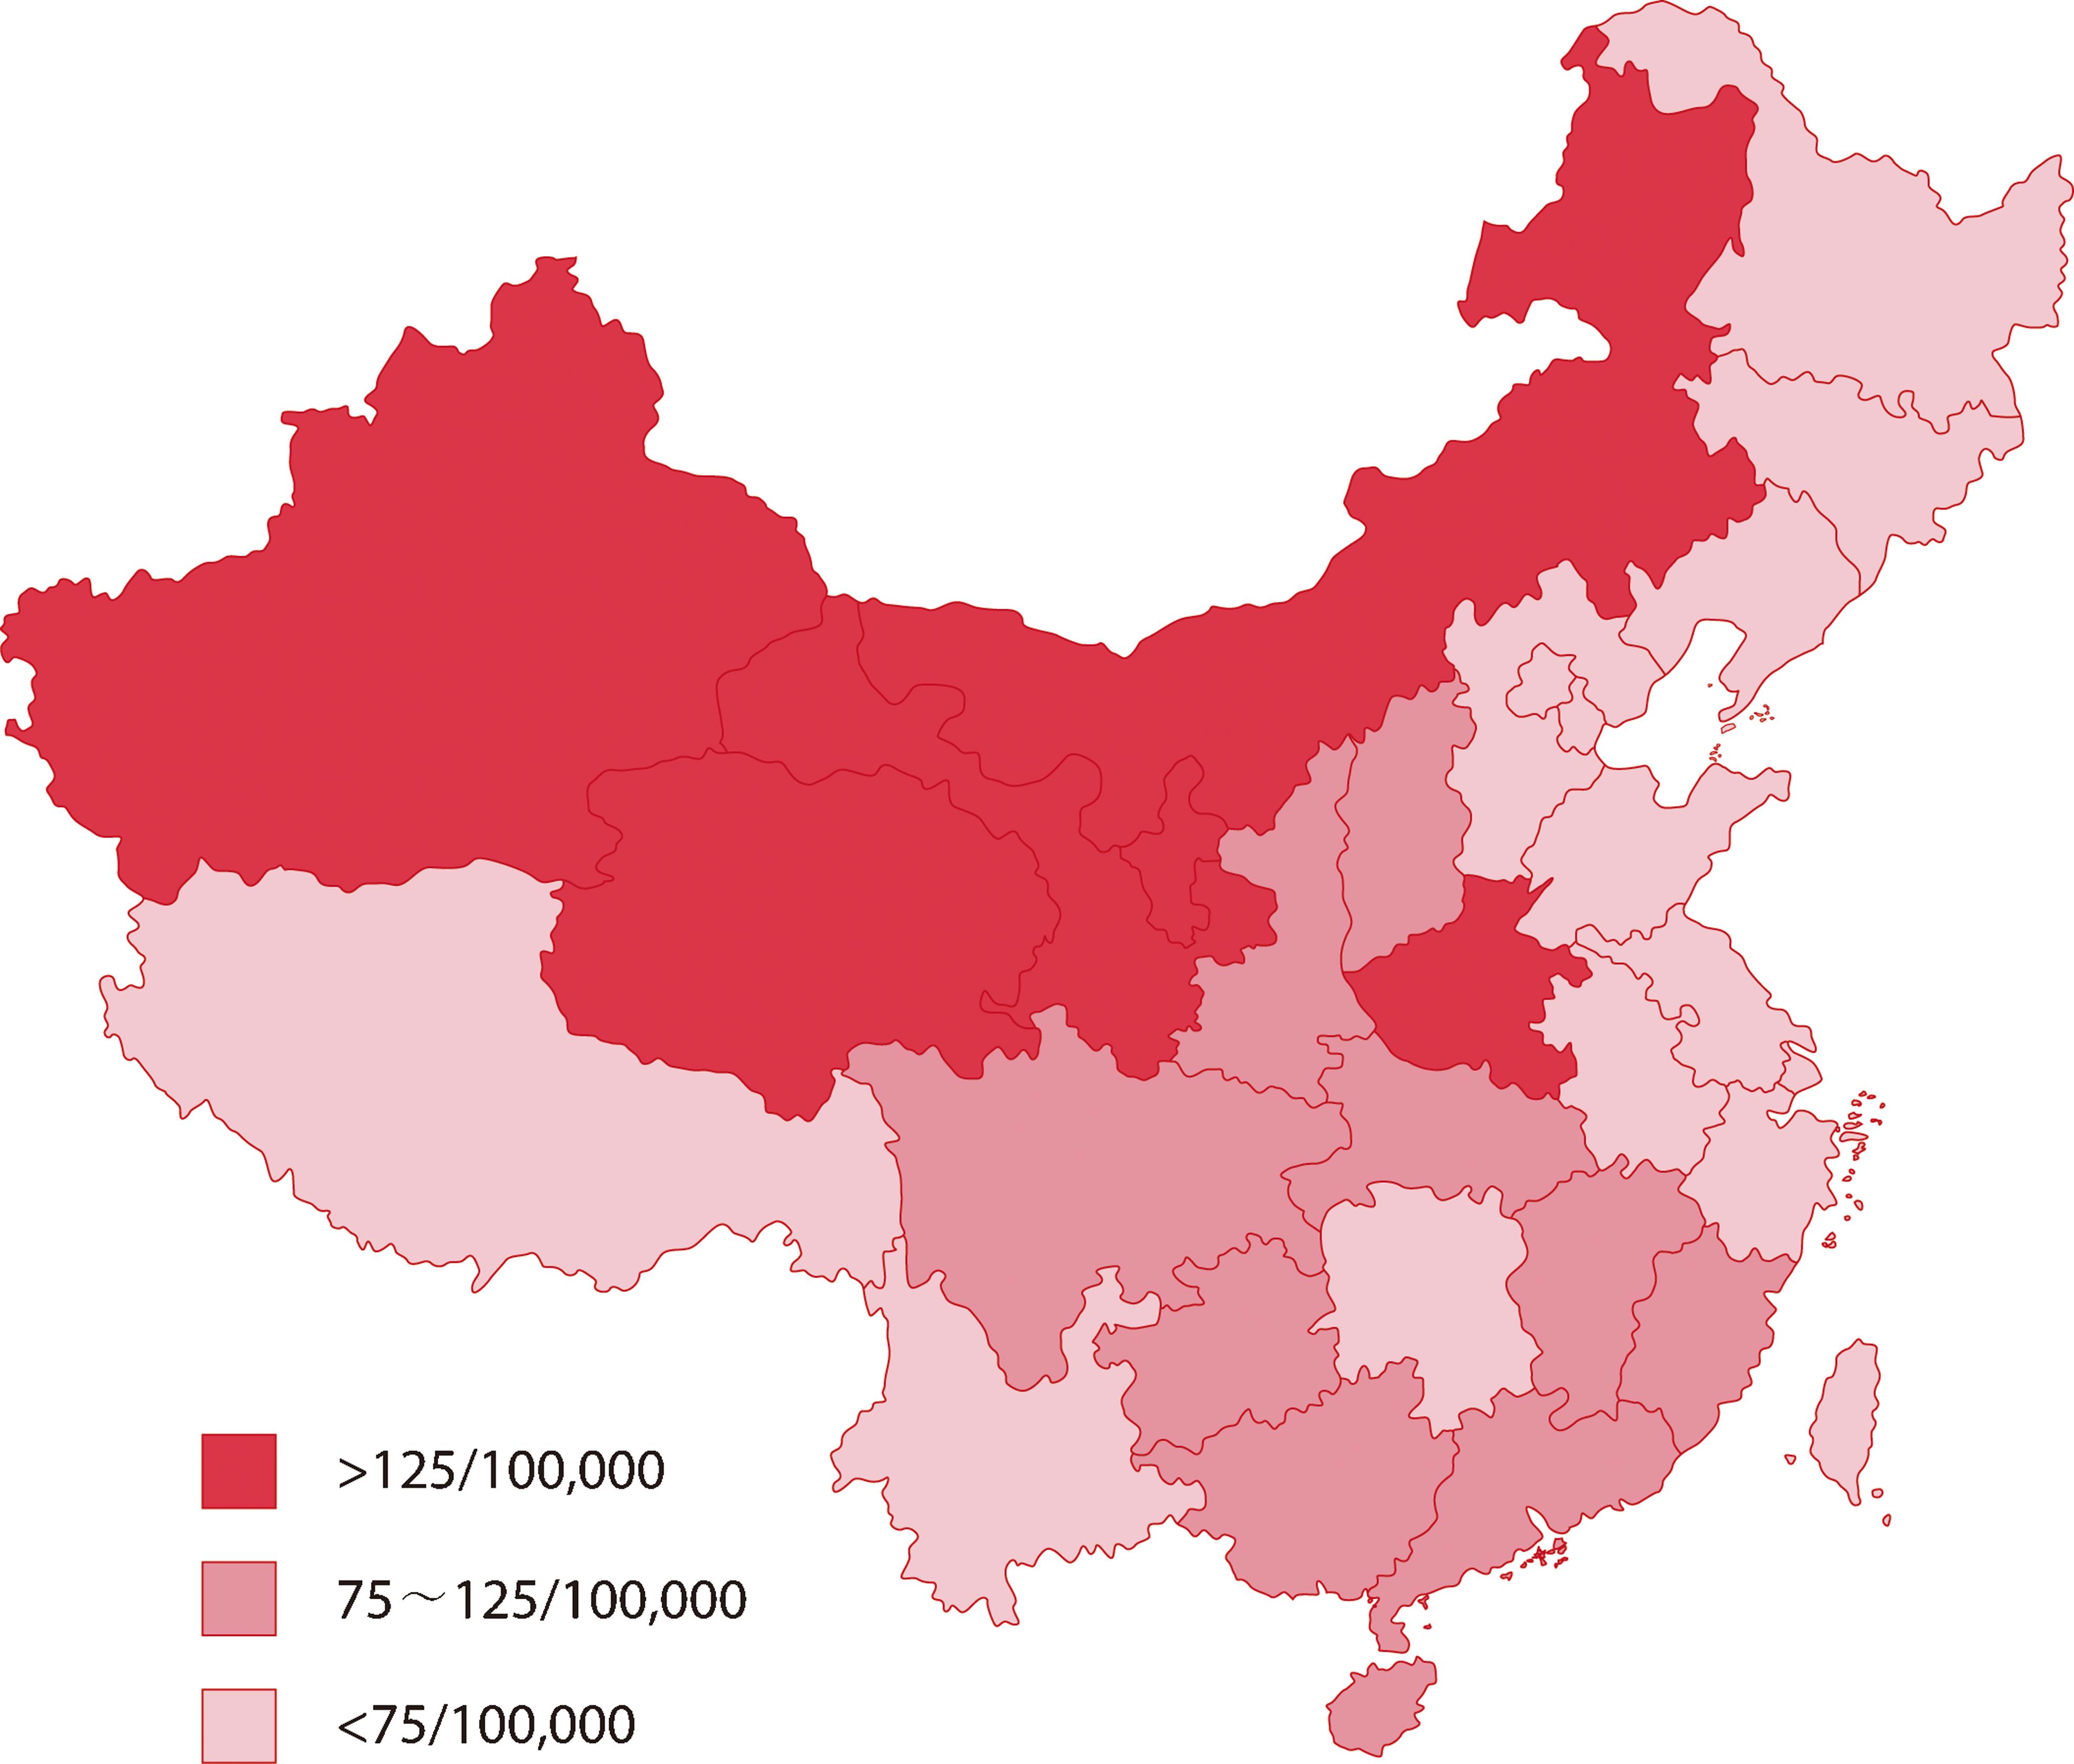 The distribution of mean reported incidence of hepatitis B in 31 provinces of China between 2005 and 2010.